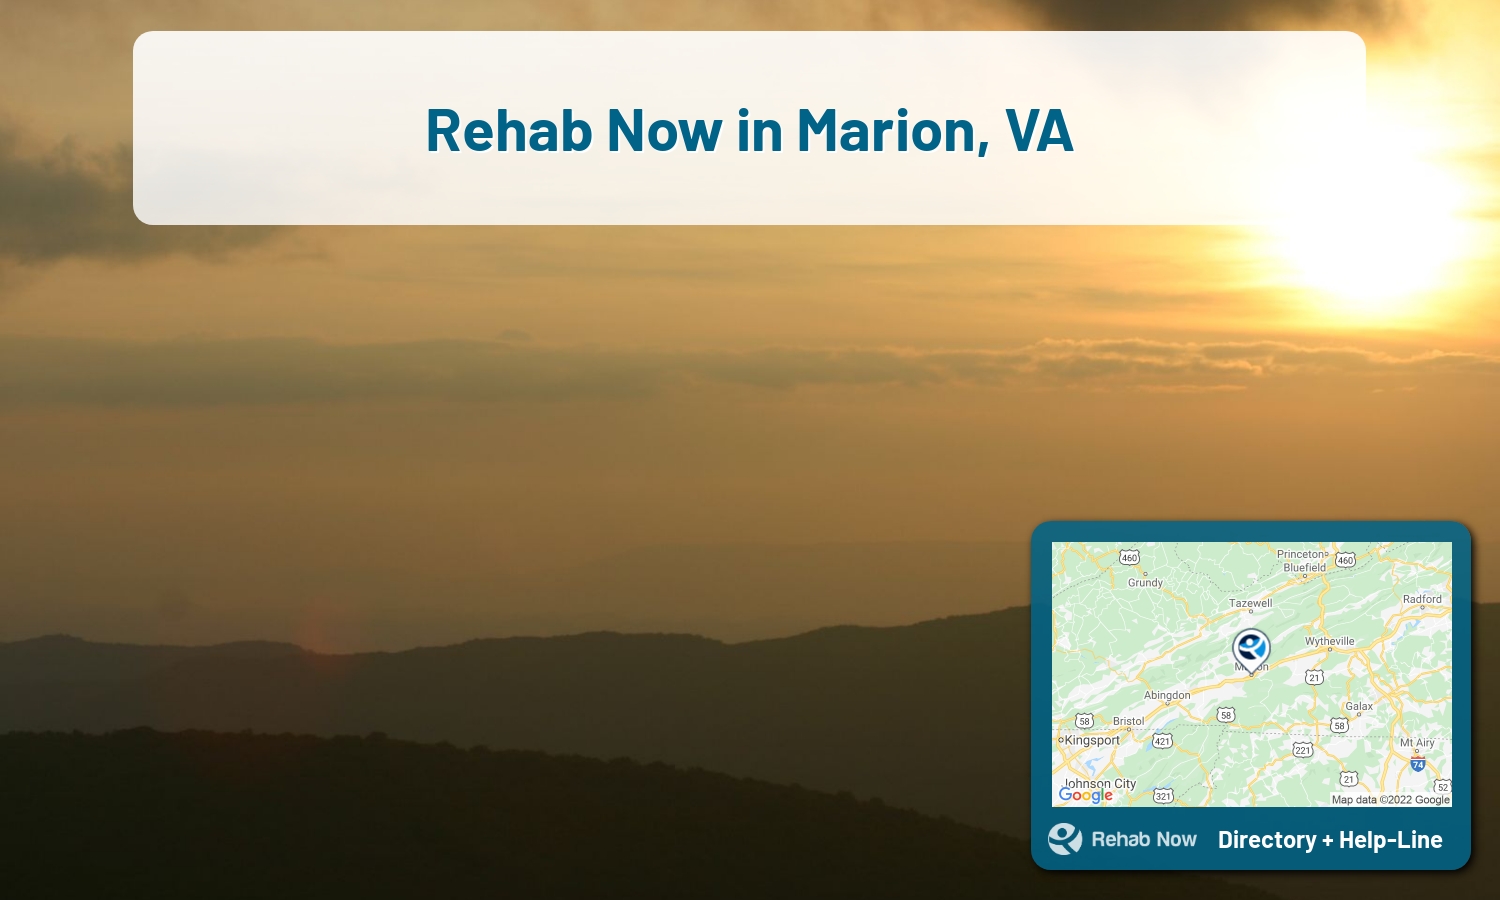 View options, availability, treatment methods, and more, for drug rehab and alcohol treatment in Marion, Virginia